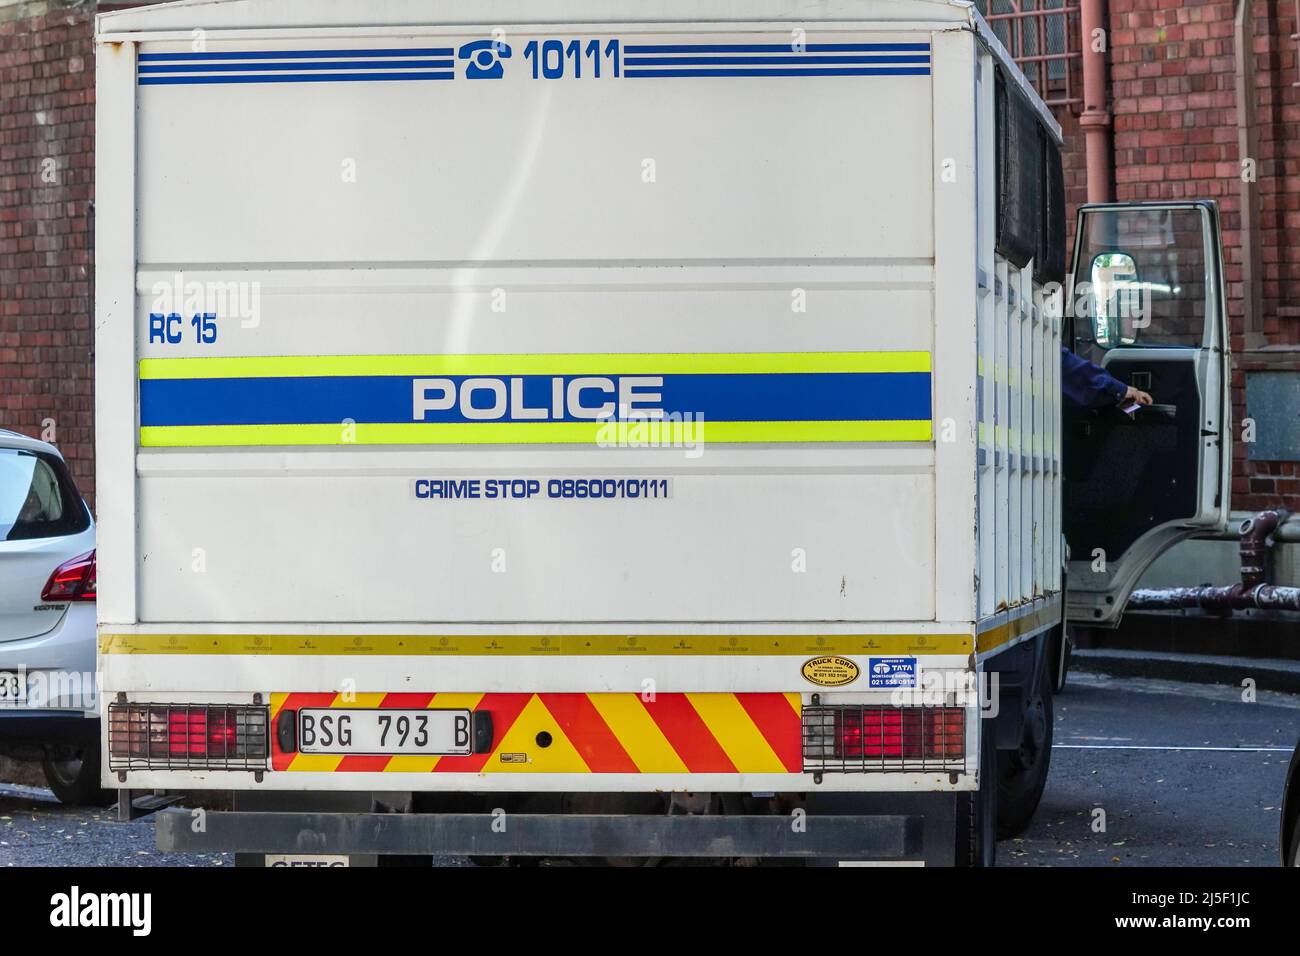 SAPS South African police service prison truck parked outside a court in the city concept public safety Stock Photo